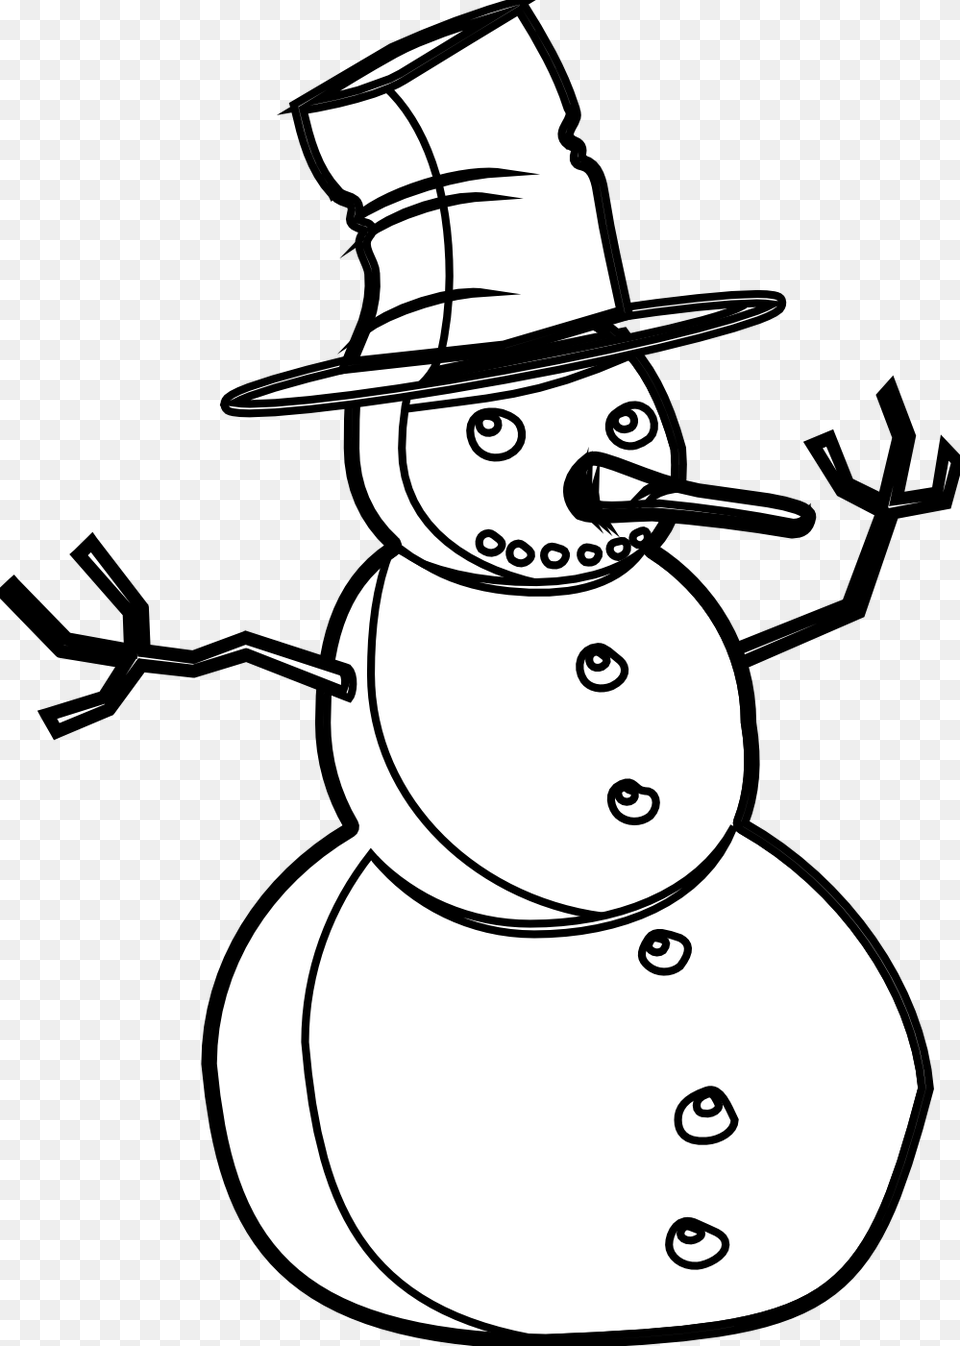 Snowman Black And White Snowman Black And White Christmas Christmas Symbols Clip Art Black And White, Nature, Outdoors, Winter, Snow Free Png